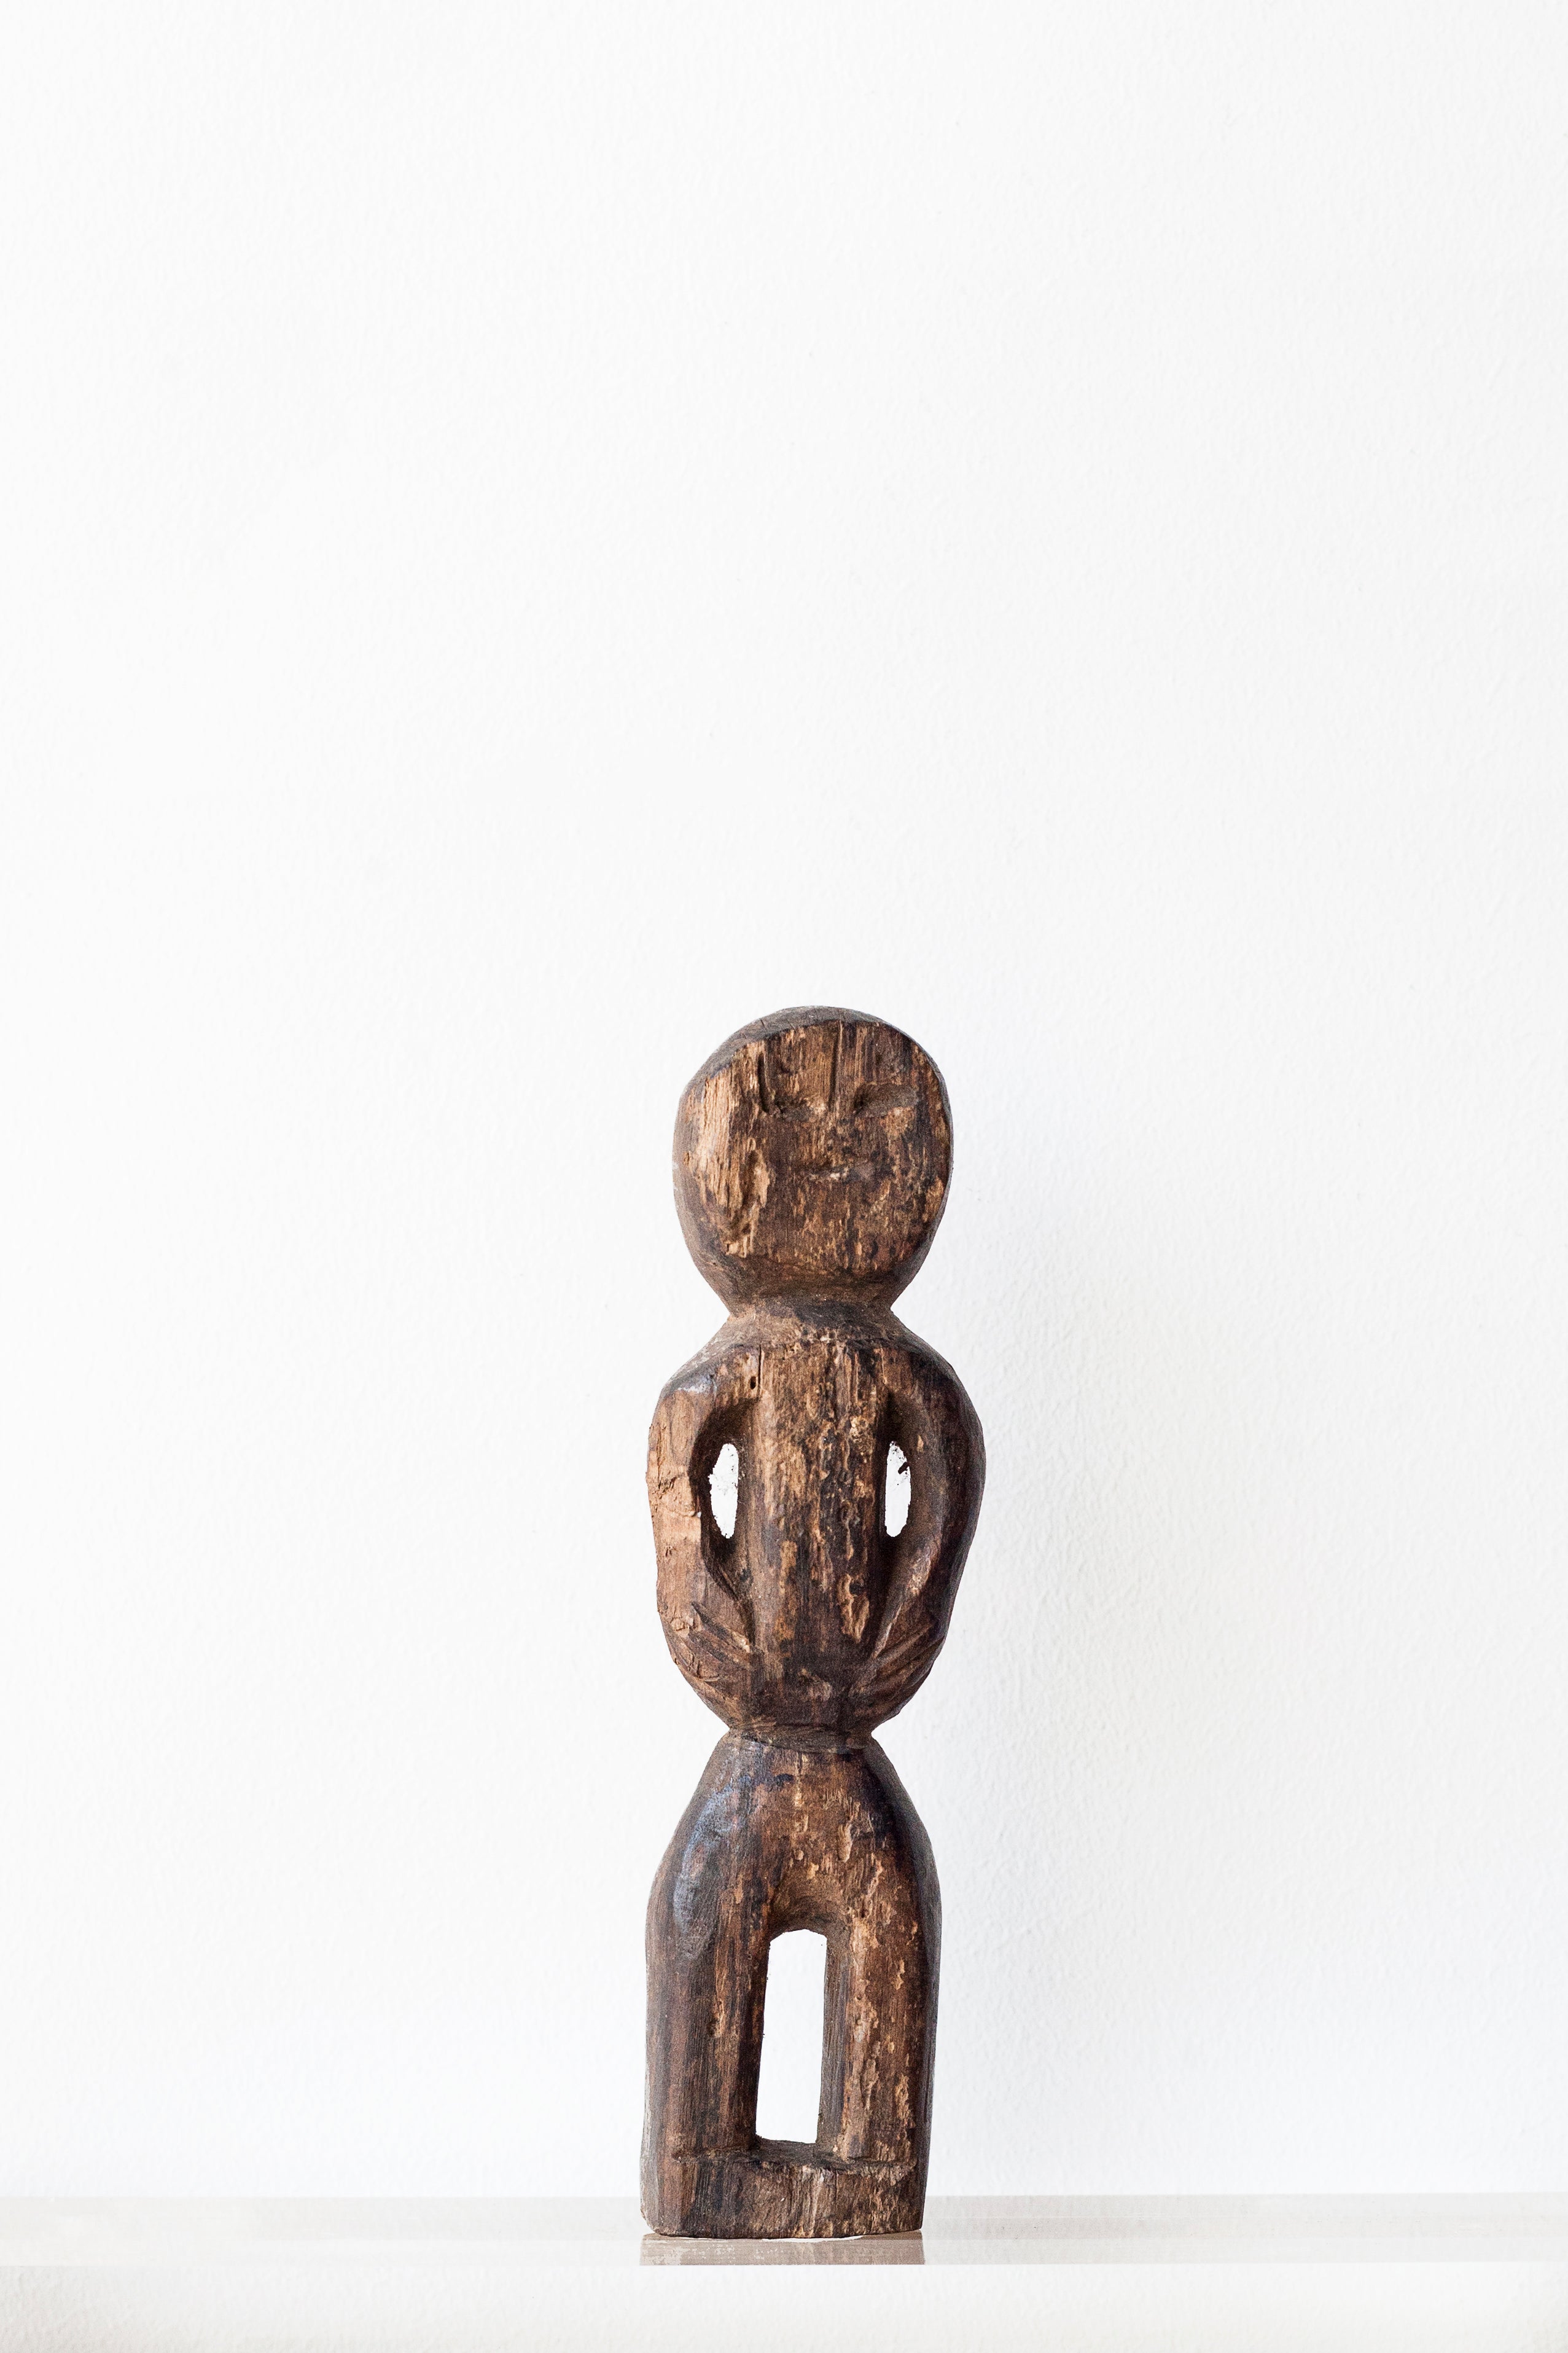 Hand-carved Wooden Figurine No. 21